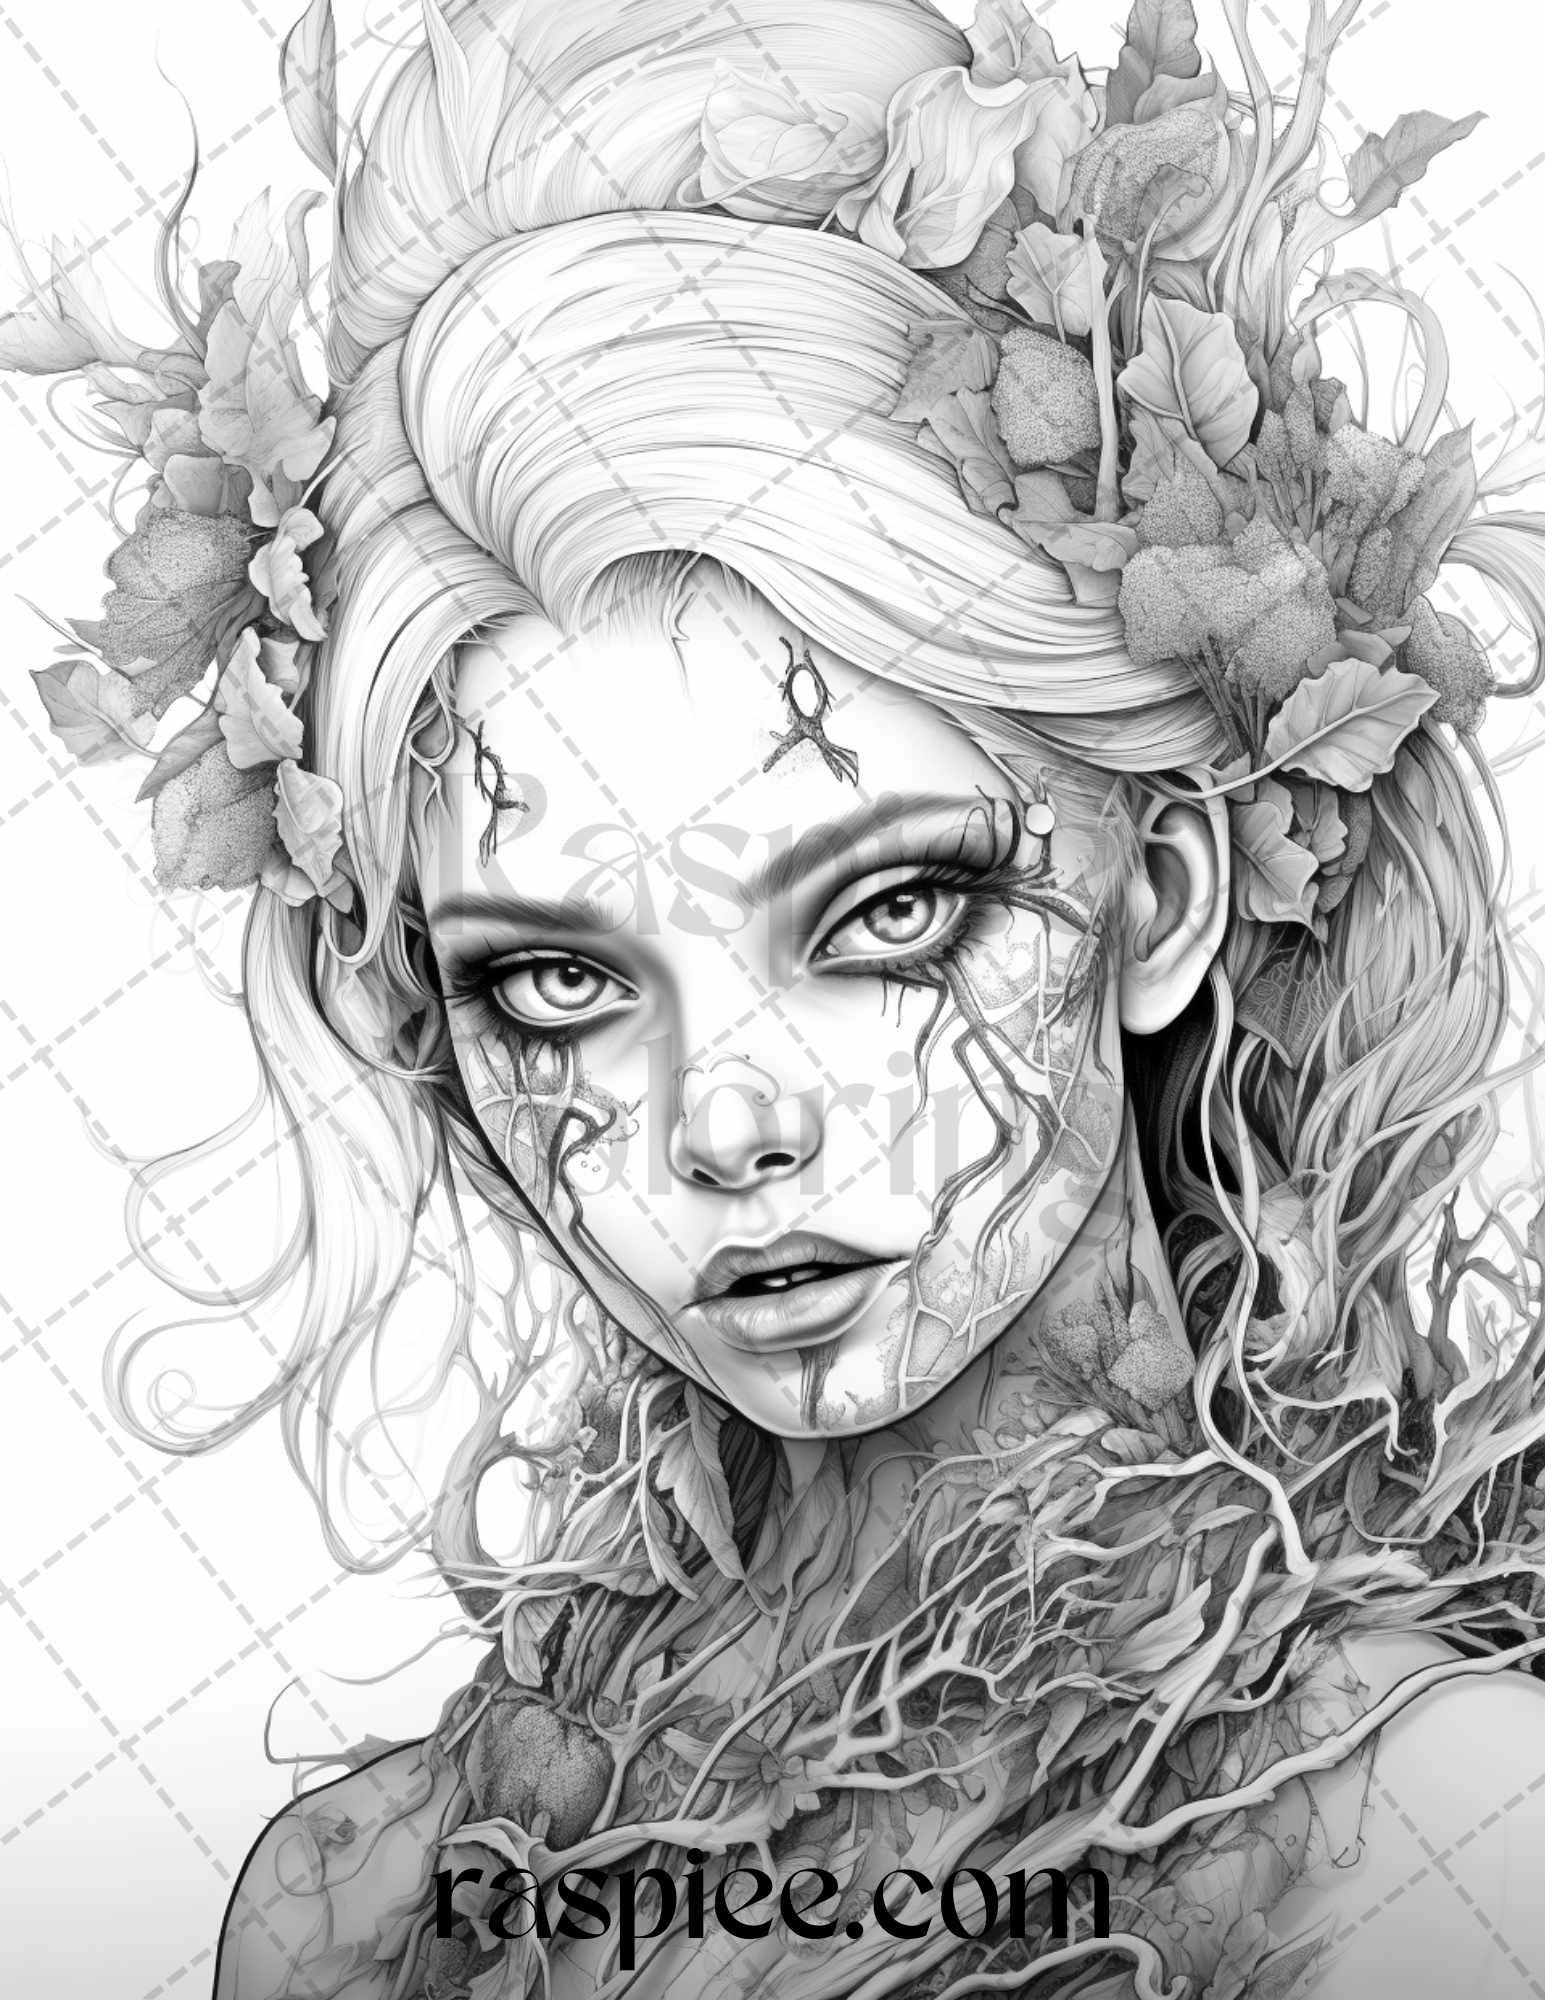 Halloween Zombie Fairy Coloring Page, Grayscale Coloring Printable, Adult Coloring Art, Scary Gothic Coloring, Halloween Decor DIY, Printable Coloring Book, Ghostly Coloring Sheet, Halloween Home Decor, Gothic Fairyland Printable, Halloween Coloring Pages for Adults